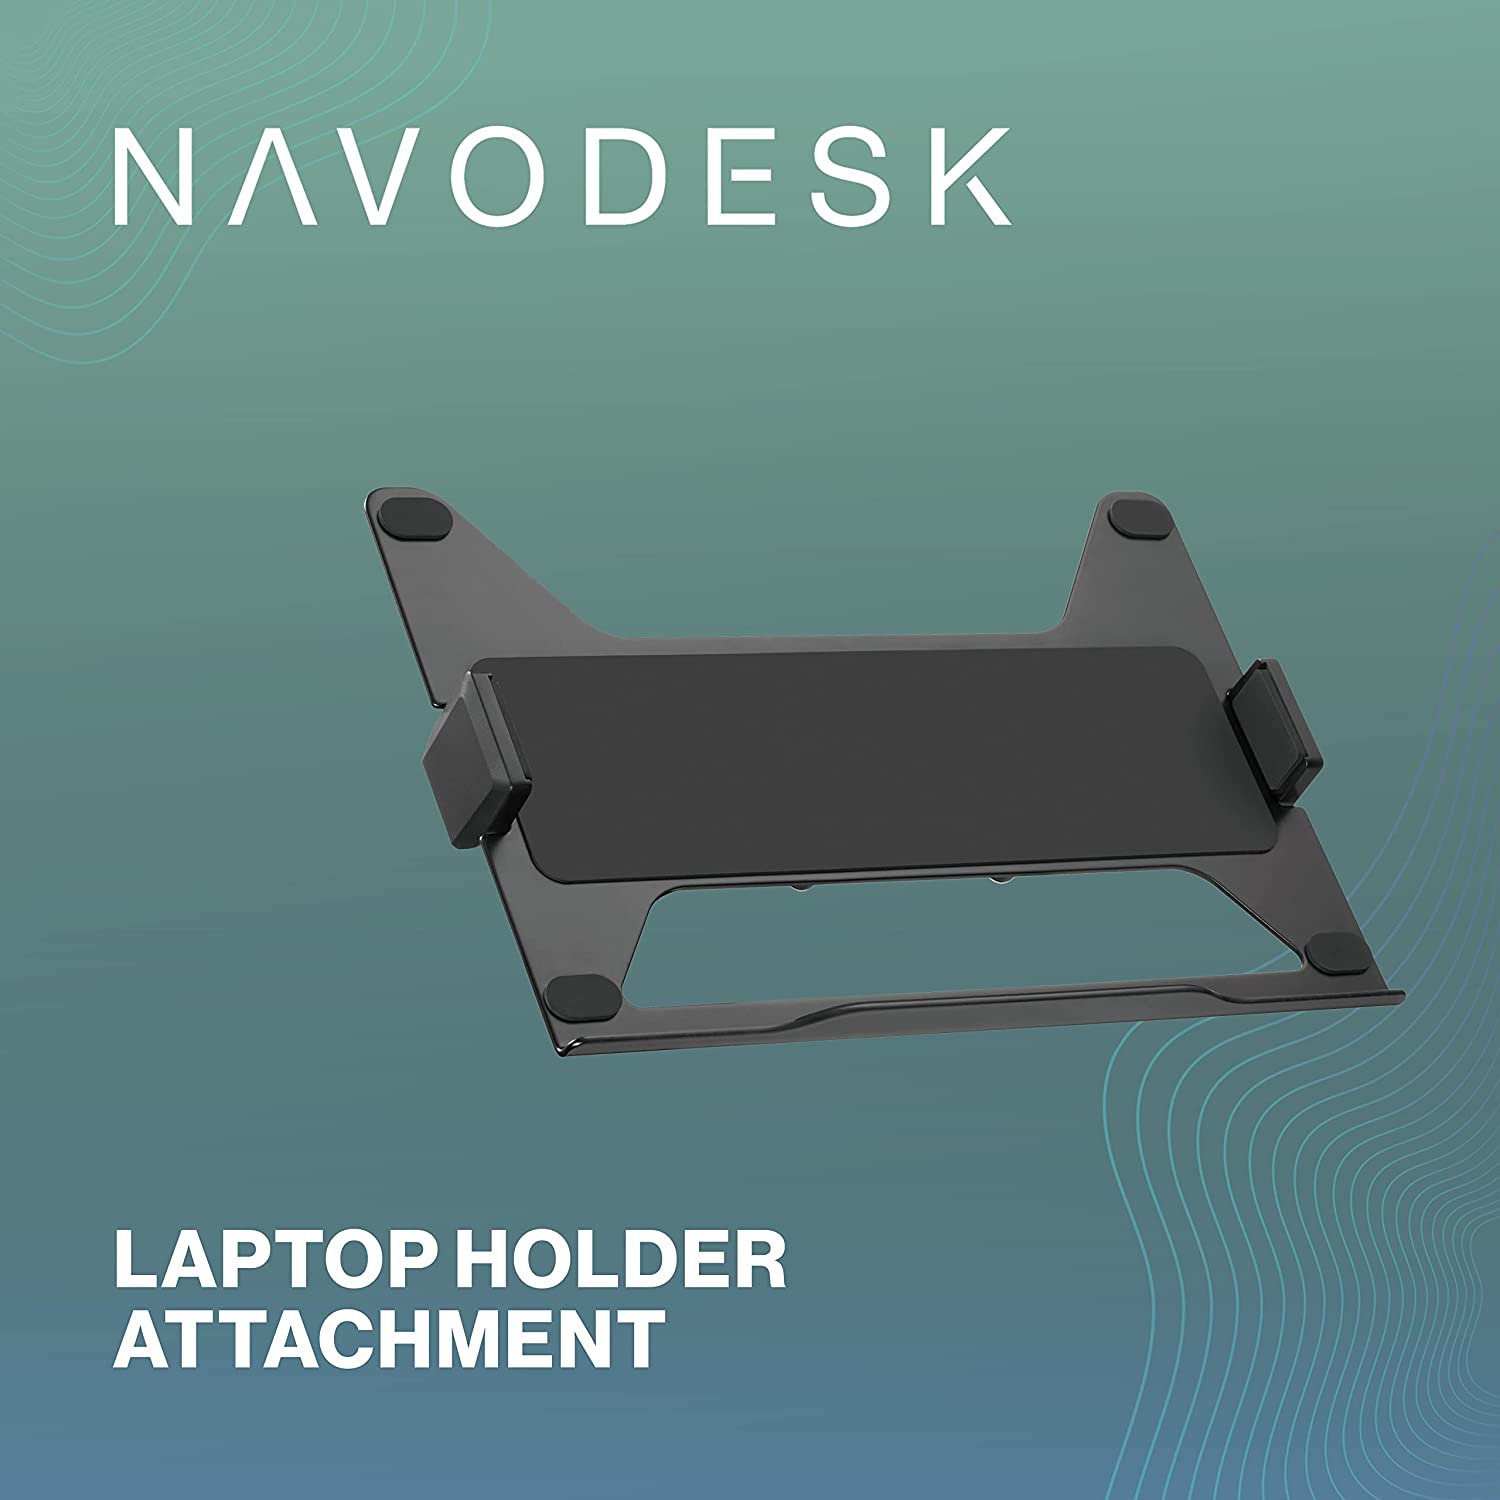 Navodesk Universal Laptop Holder Attachment For Monitor Arms - Fit for 11.6”-17.3” Laptops, Ventilated Design with Anti-Scratch Silicone Pads (Black) shop online